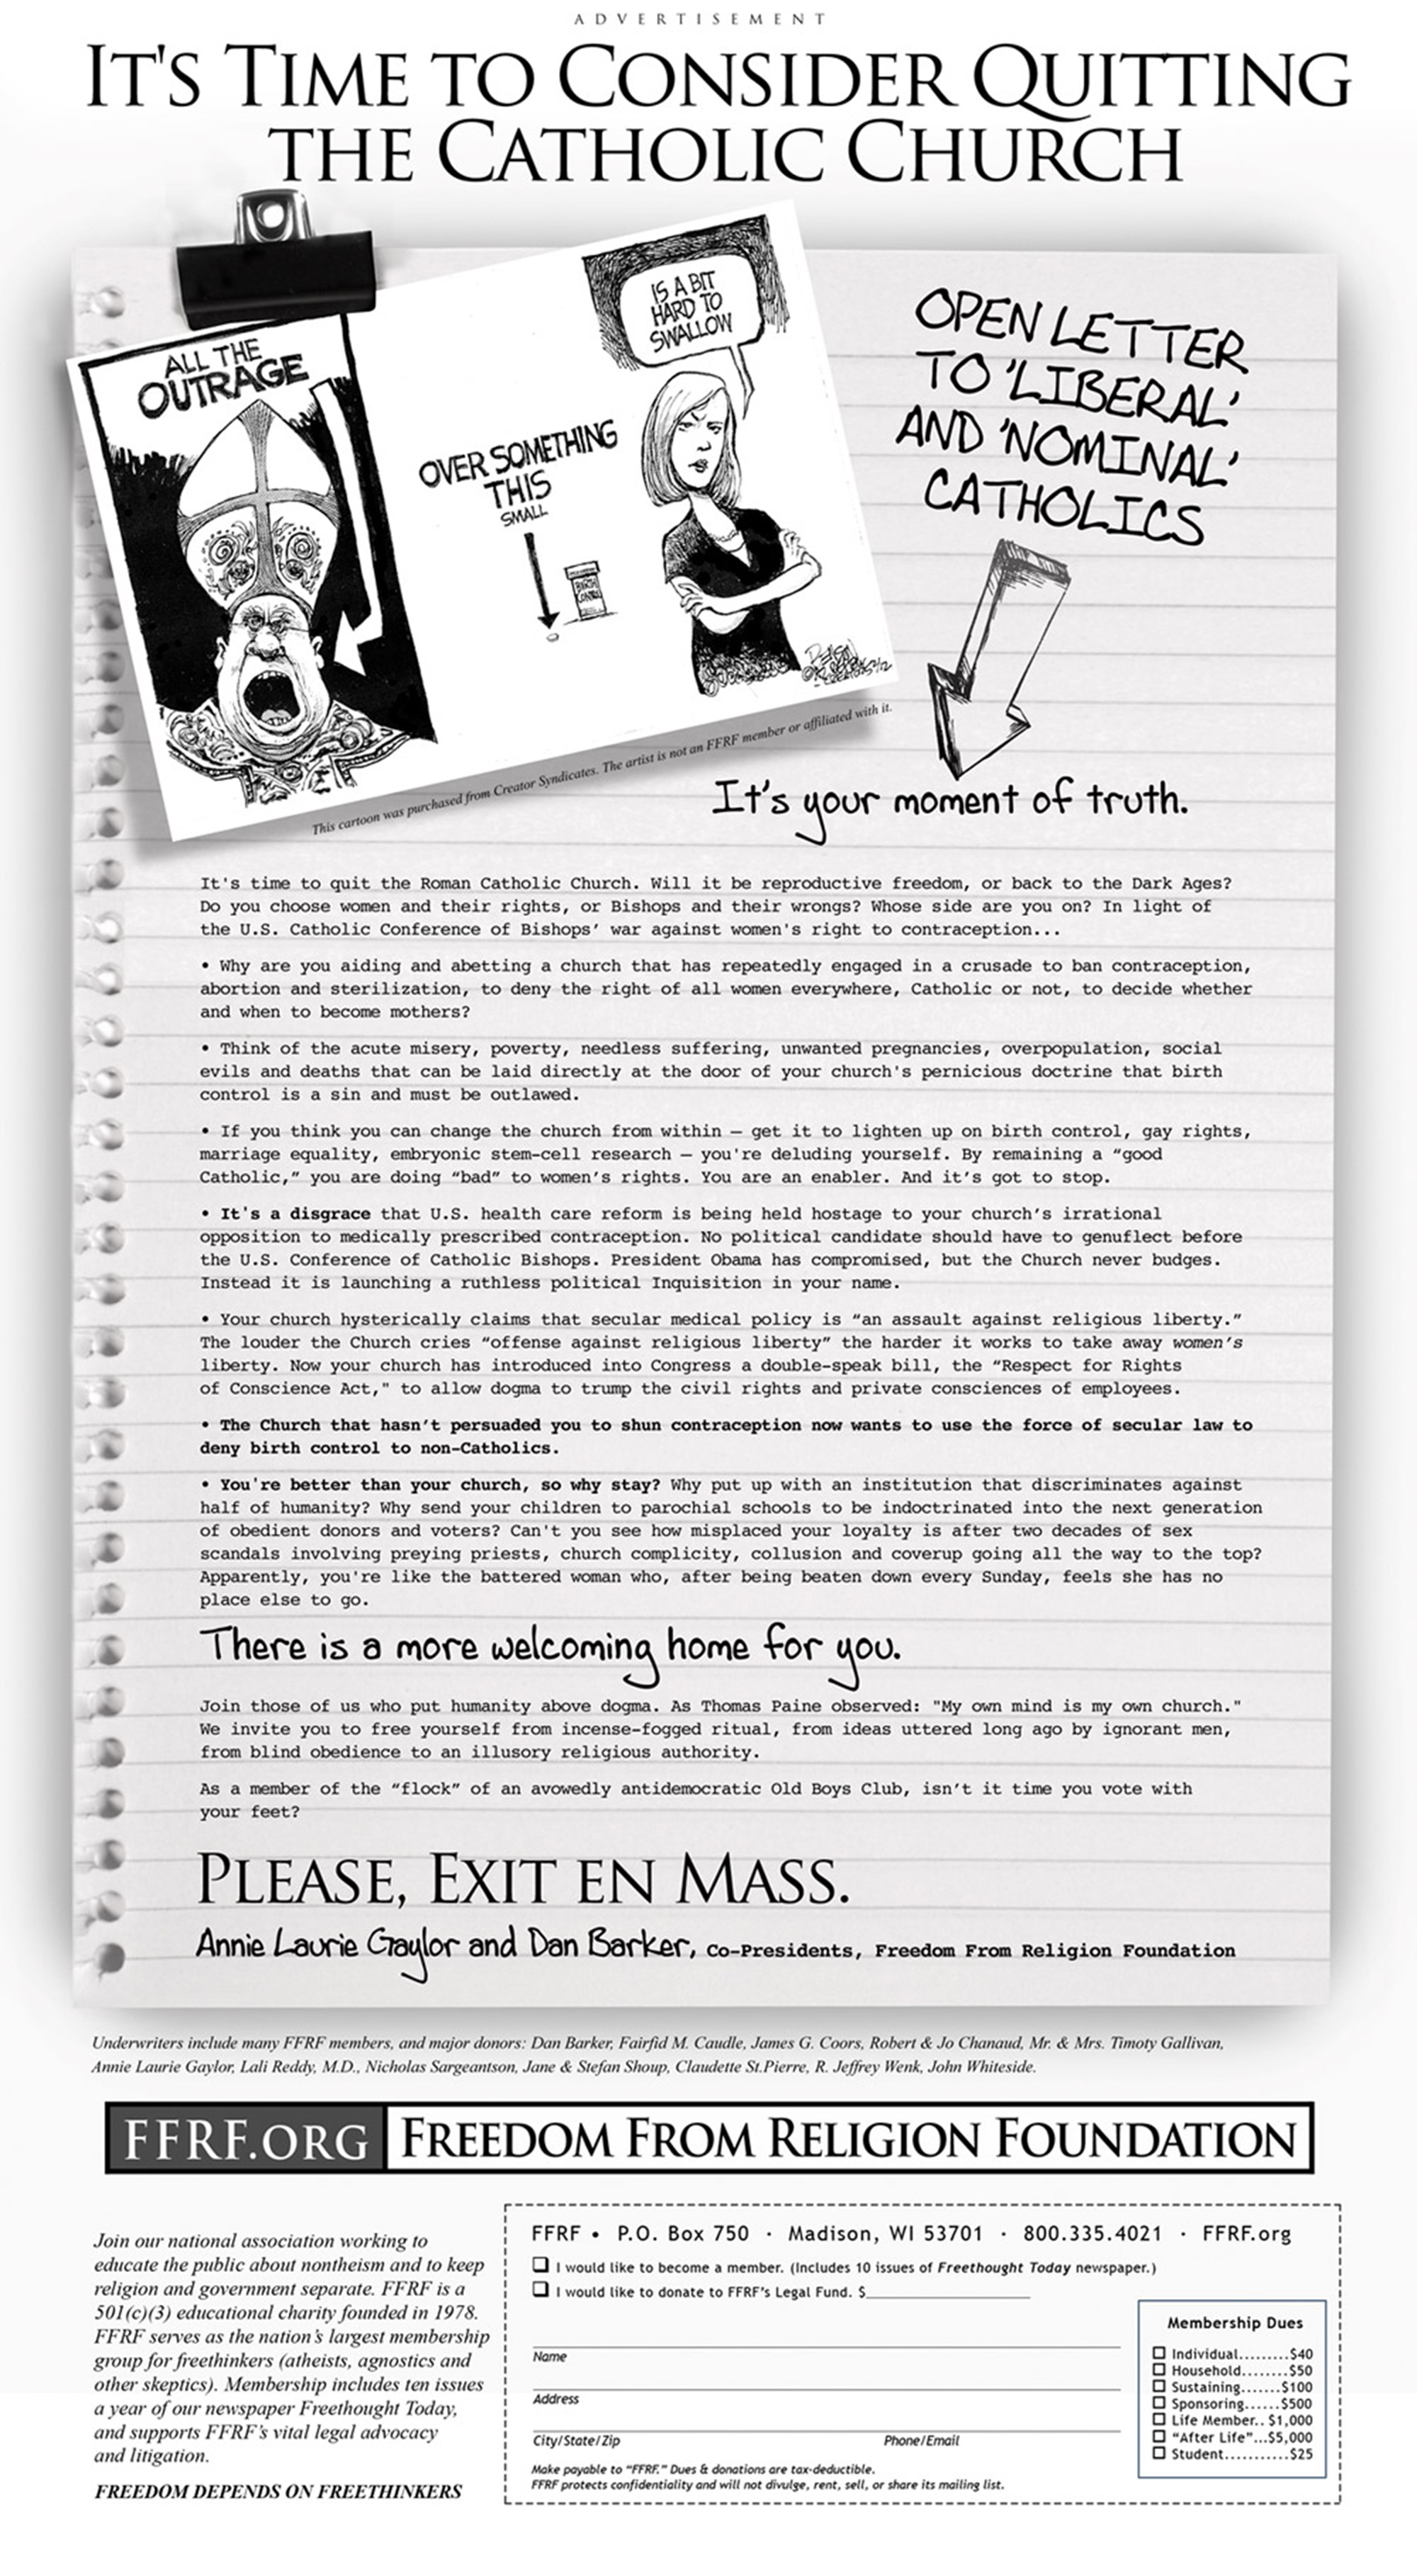 Anti-Muslim Group Wants to Run FFRF-Like Ad in <em>New York Times</em>; NYT Says No